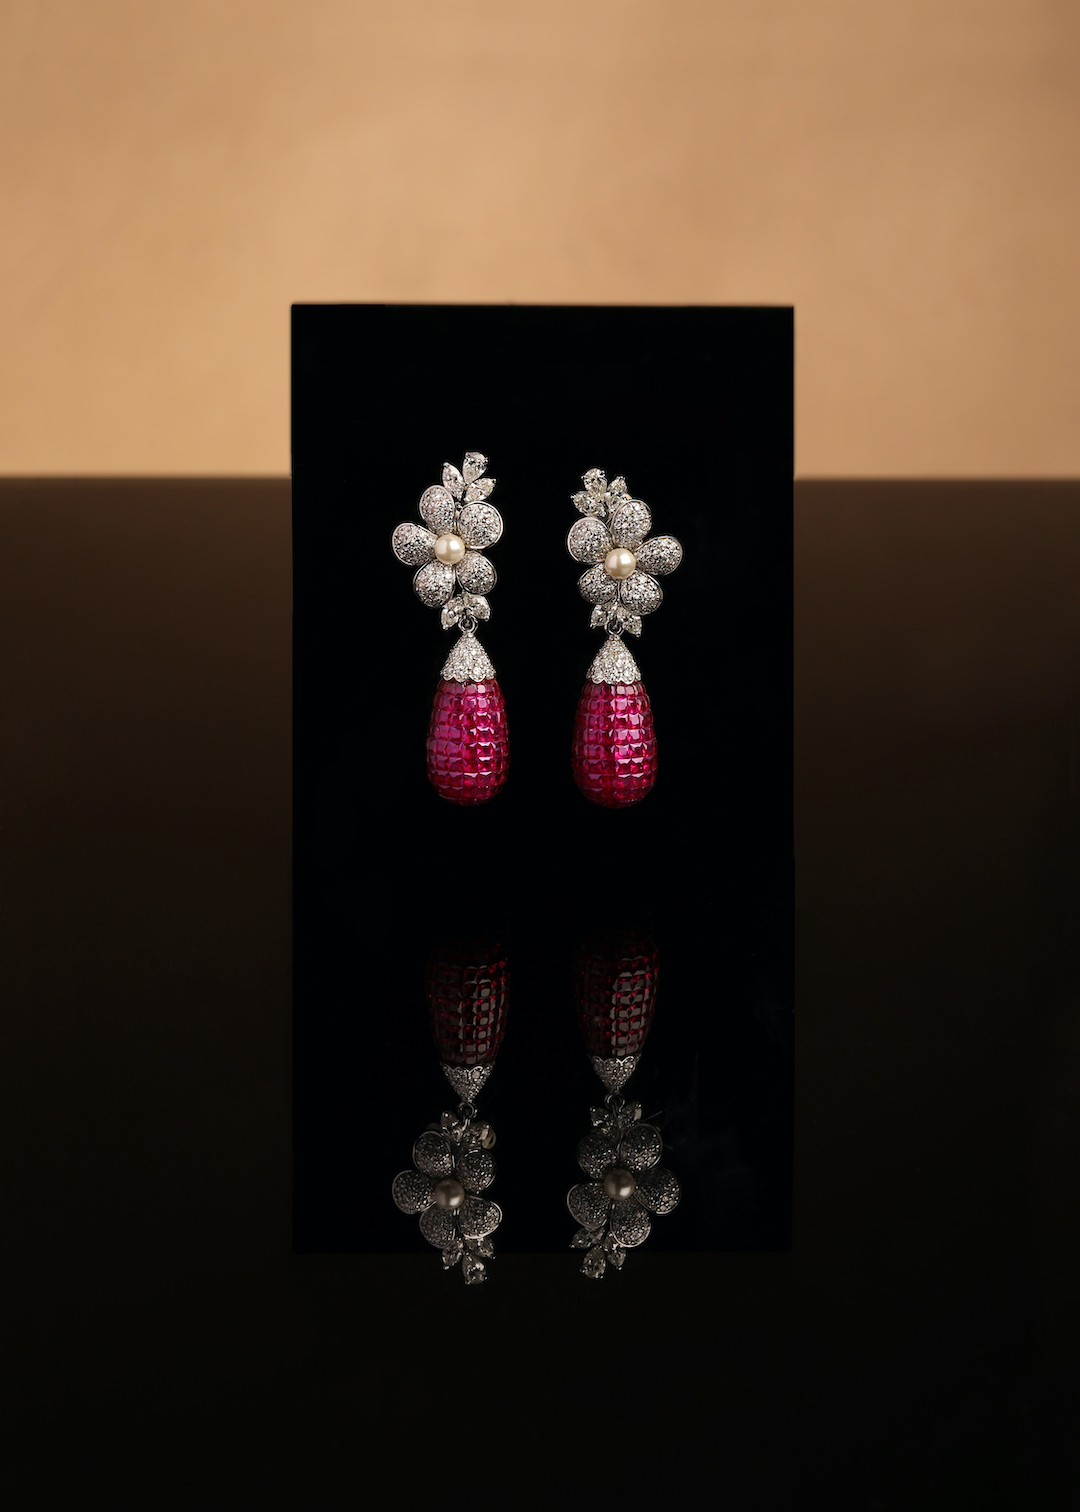 Invisible ball and flower diamond earrings